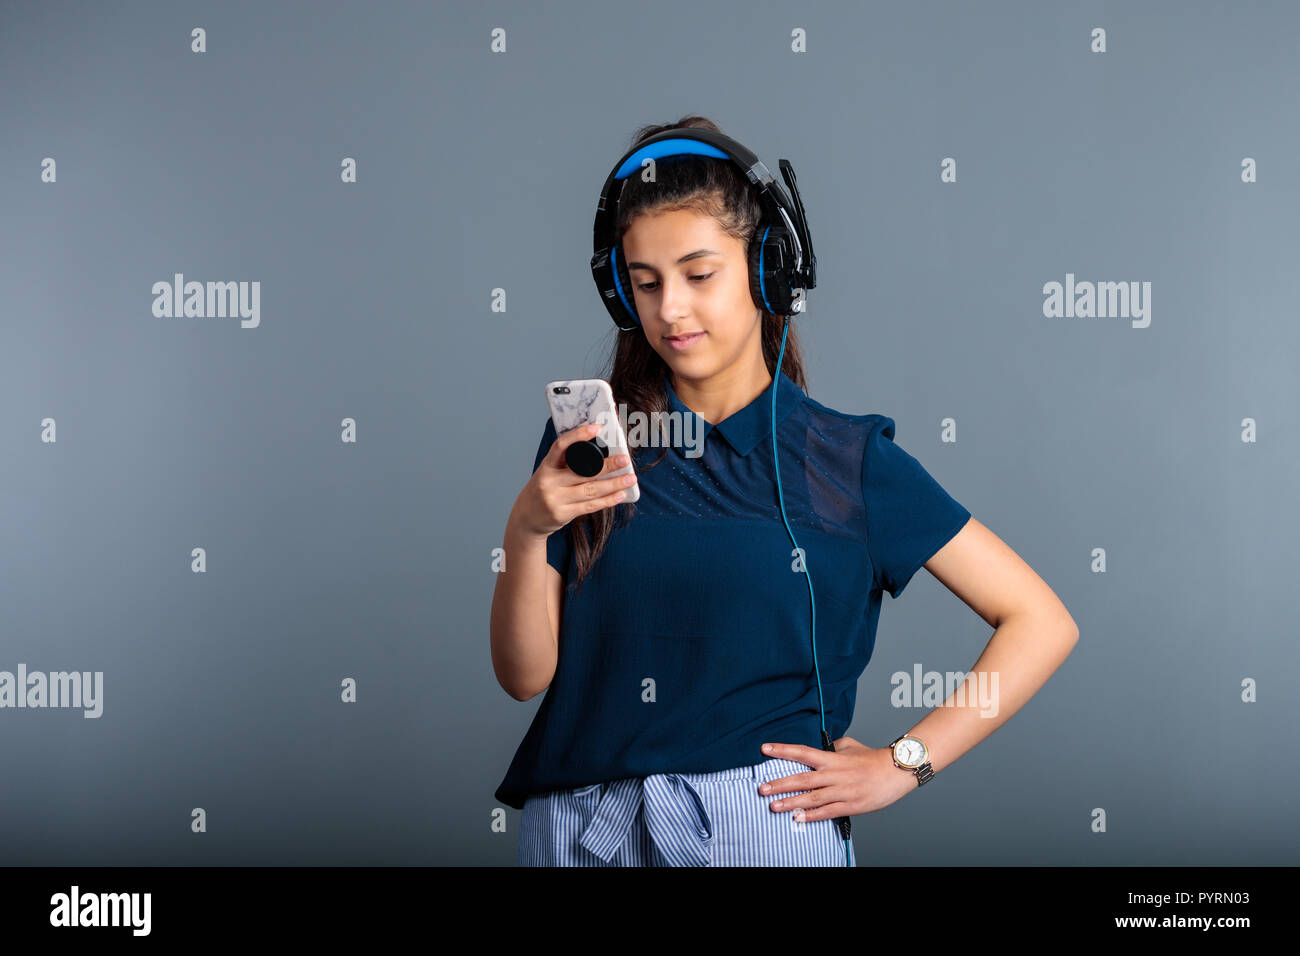 Teenage girl with headphones on while looking on her mobile phone Stock Photo